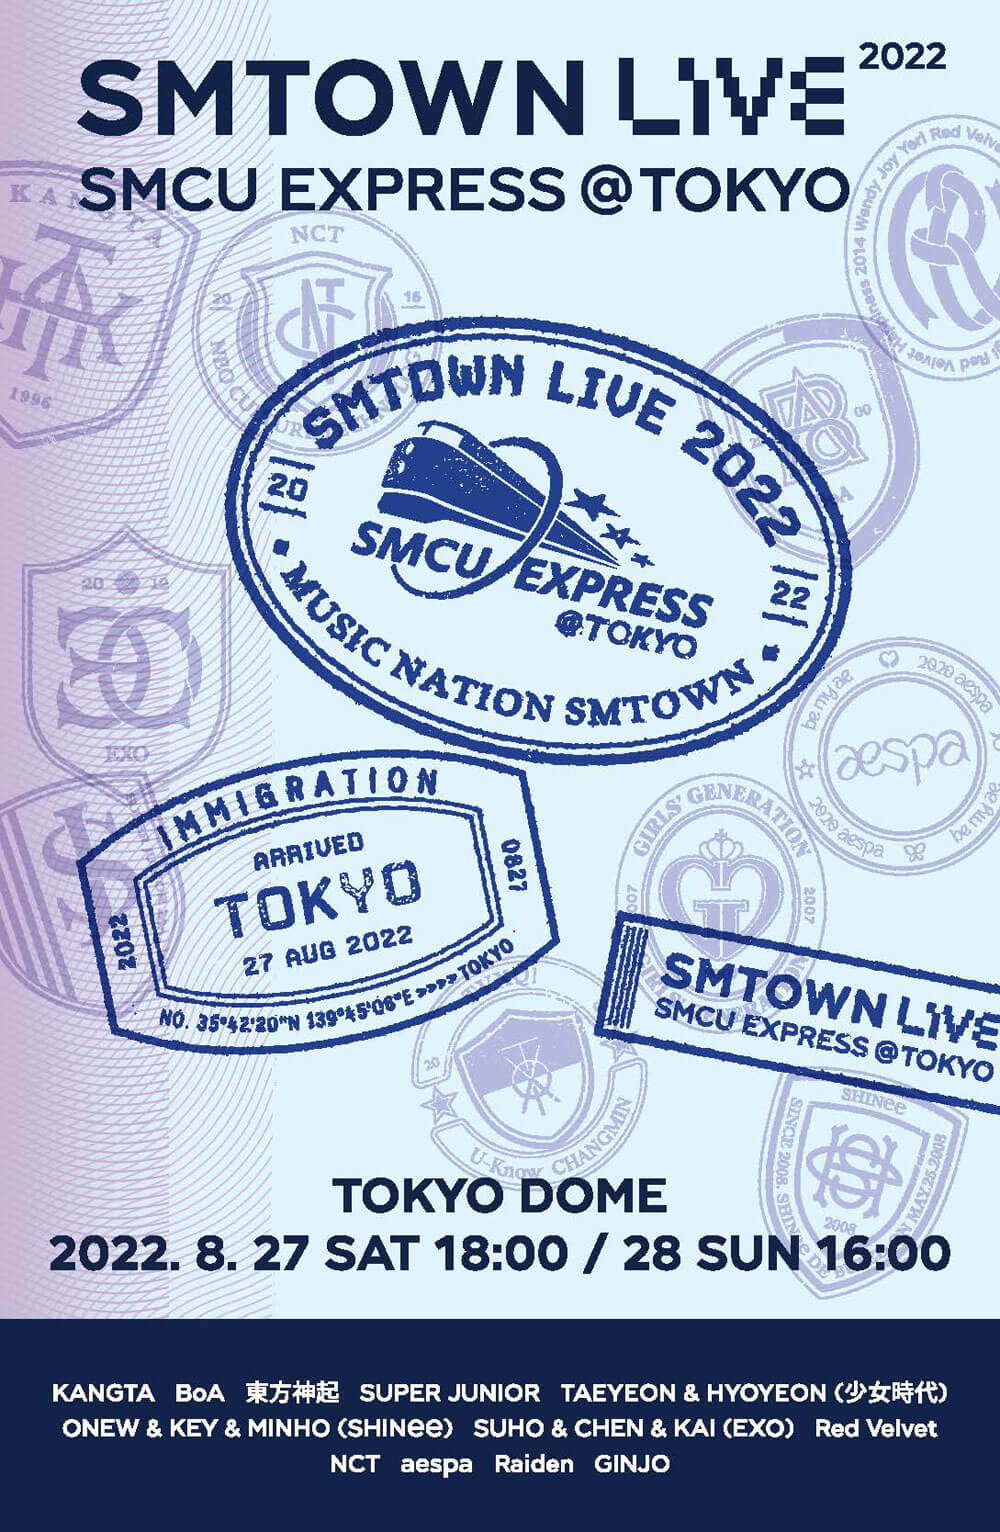 SMTOWN LIVE 2022：SMCU EXPRESS＠TOKYO」 開催決定！ SMTOWN OFFICIAL 